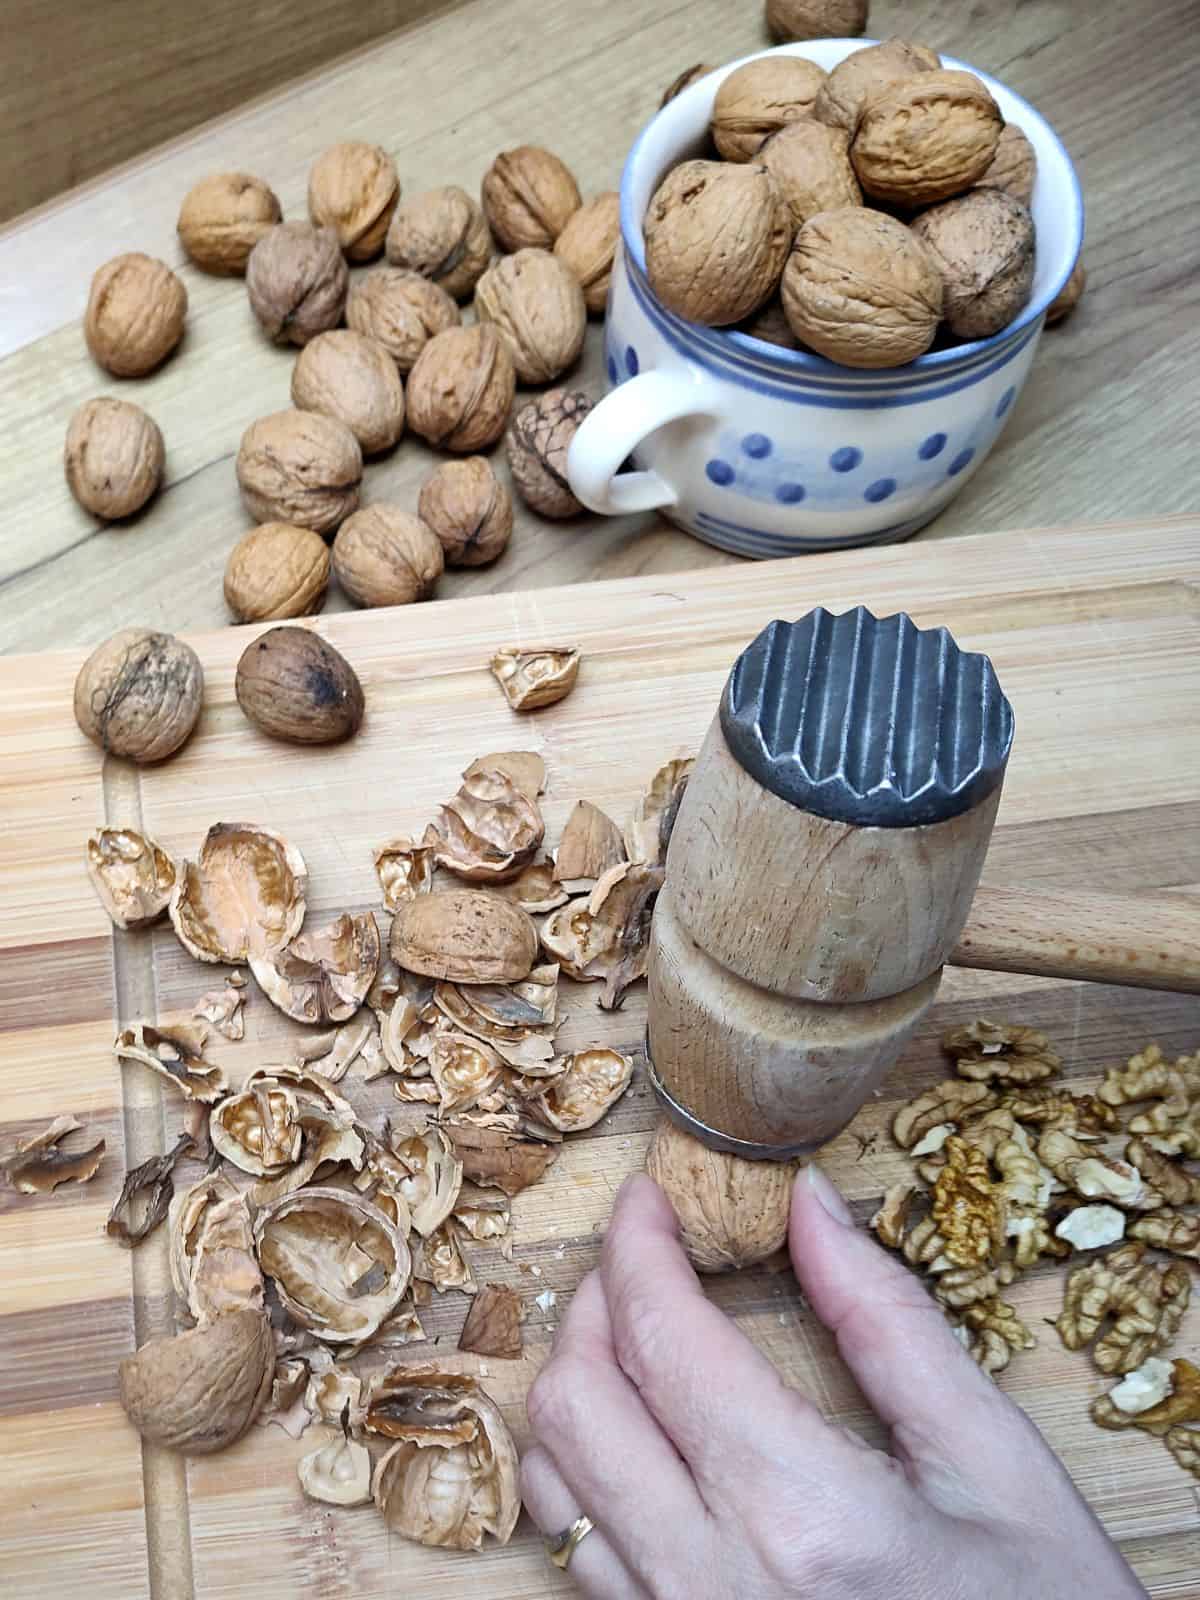 Cracking the walnuts with a wooden mallet.